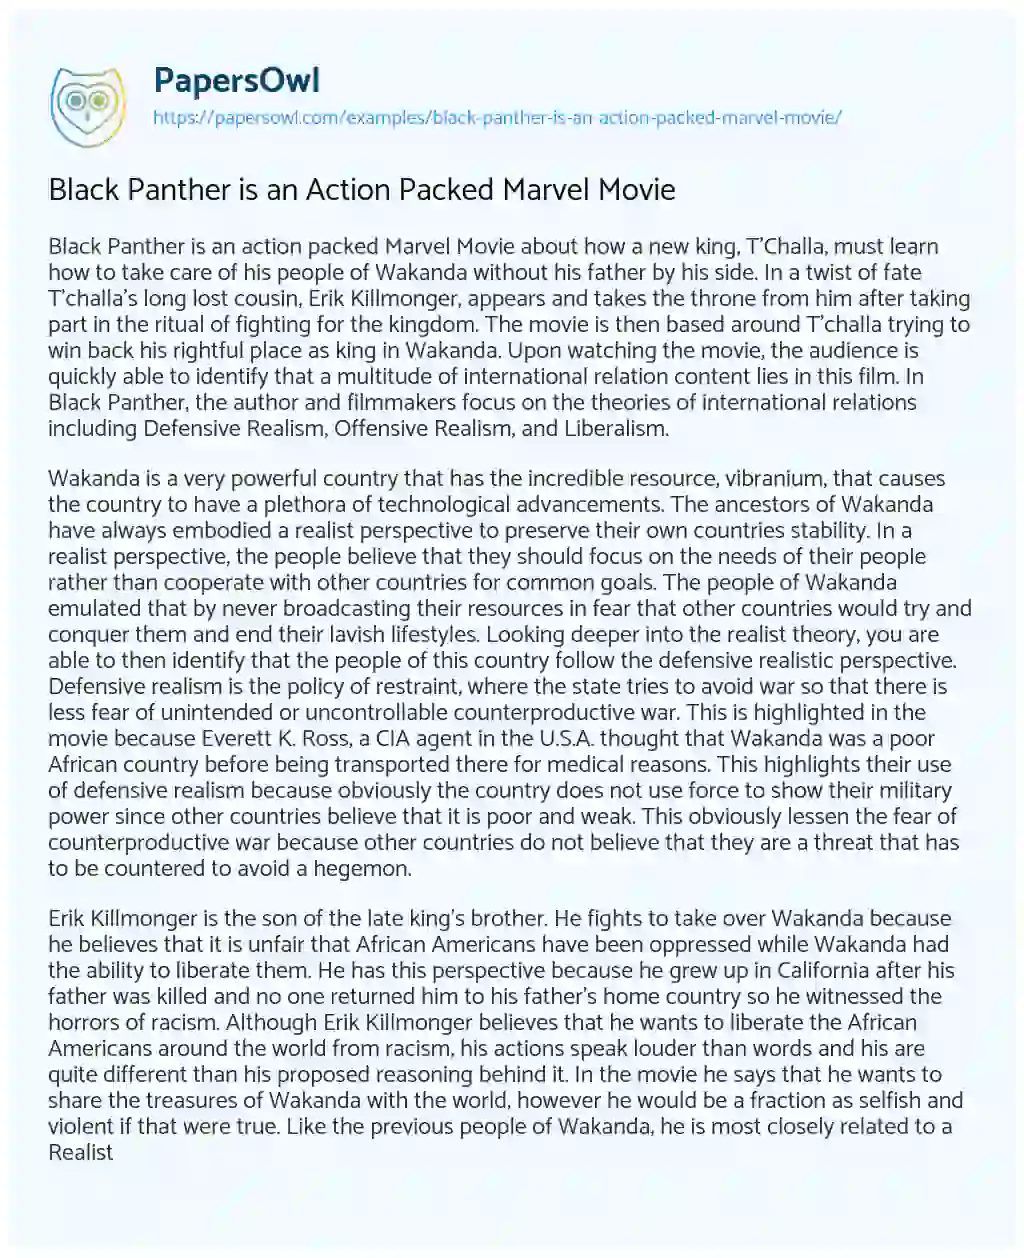 Black Panther is an Action Packed Marvel Movie essay